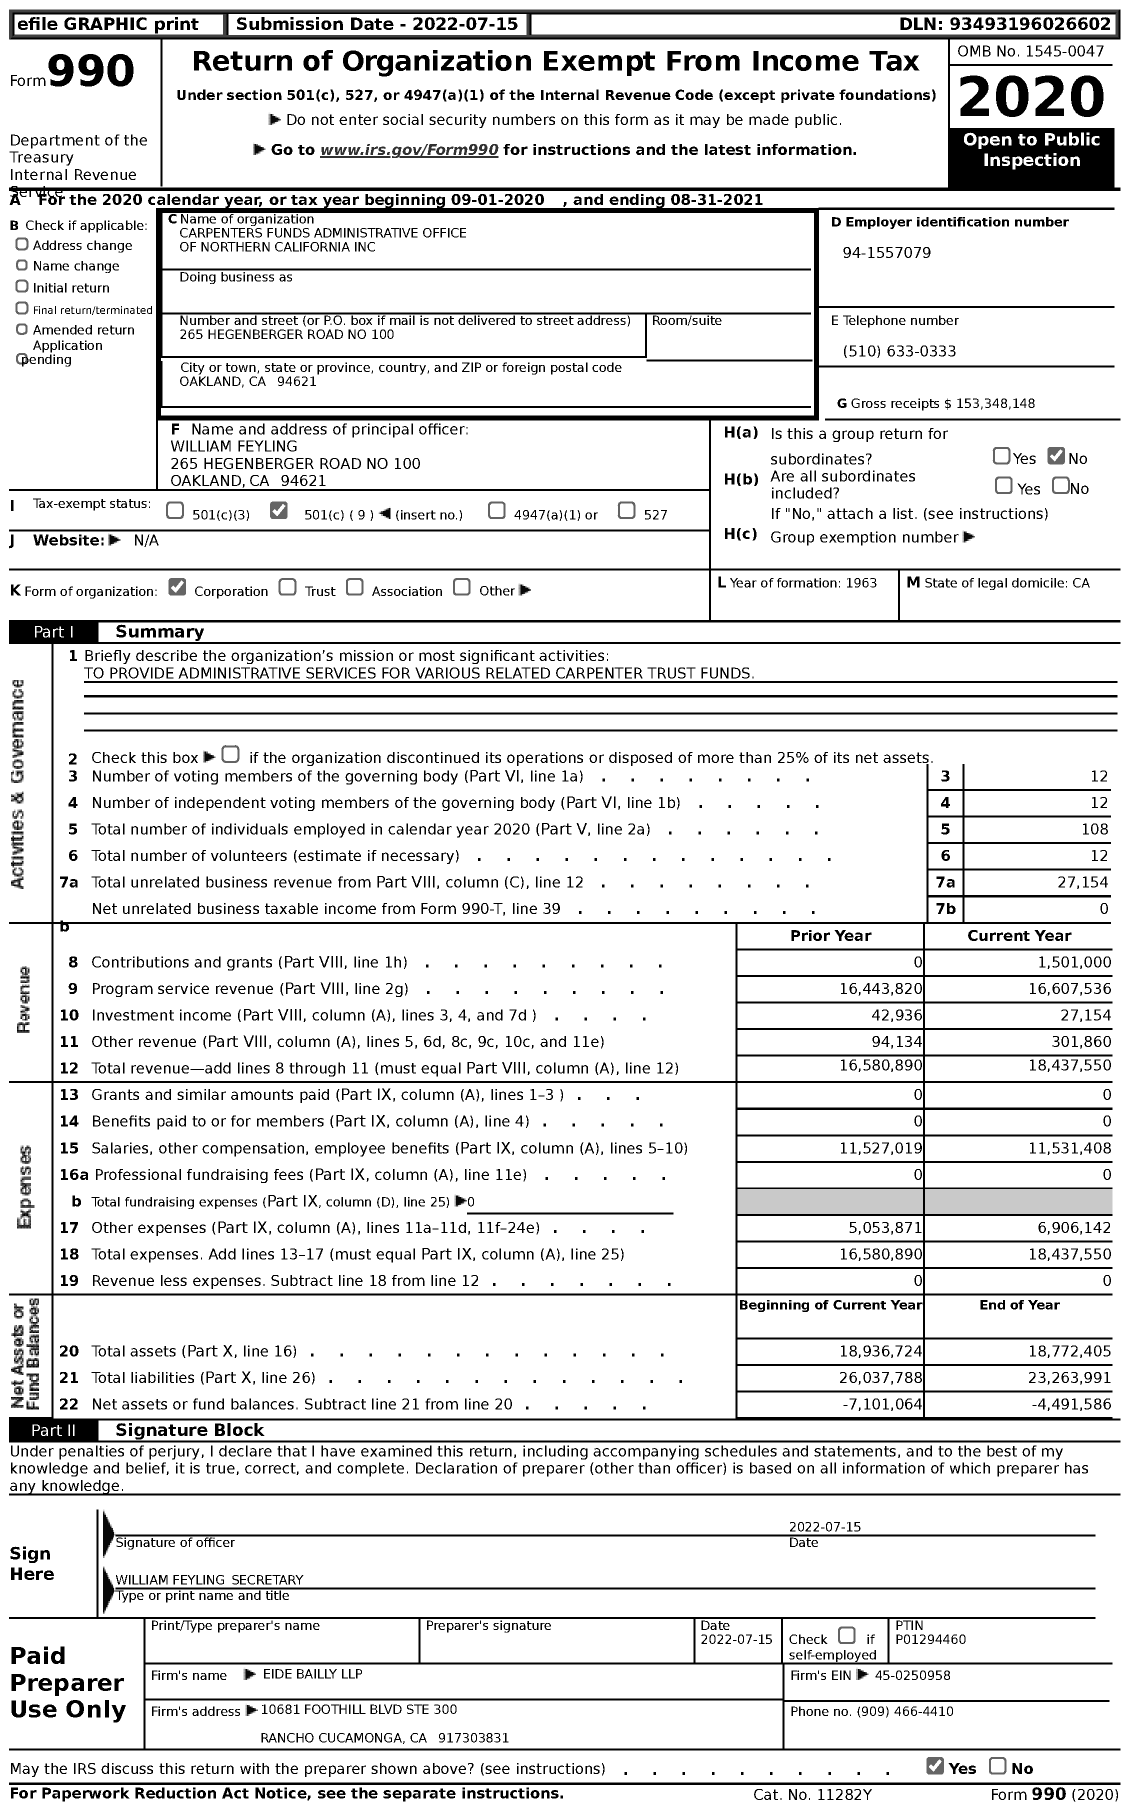 Image of first page of 2020 Form 990 for Carpenters Funds Administrative Office of Northern California